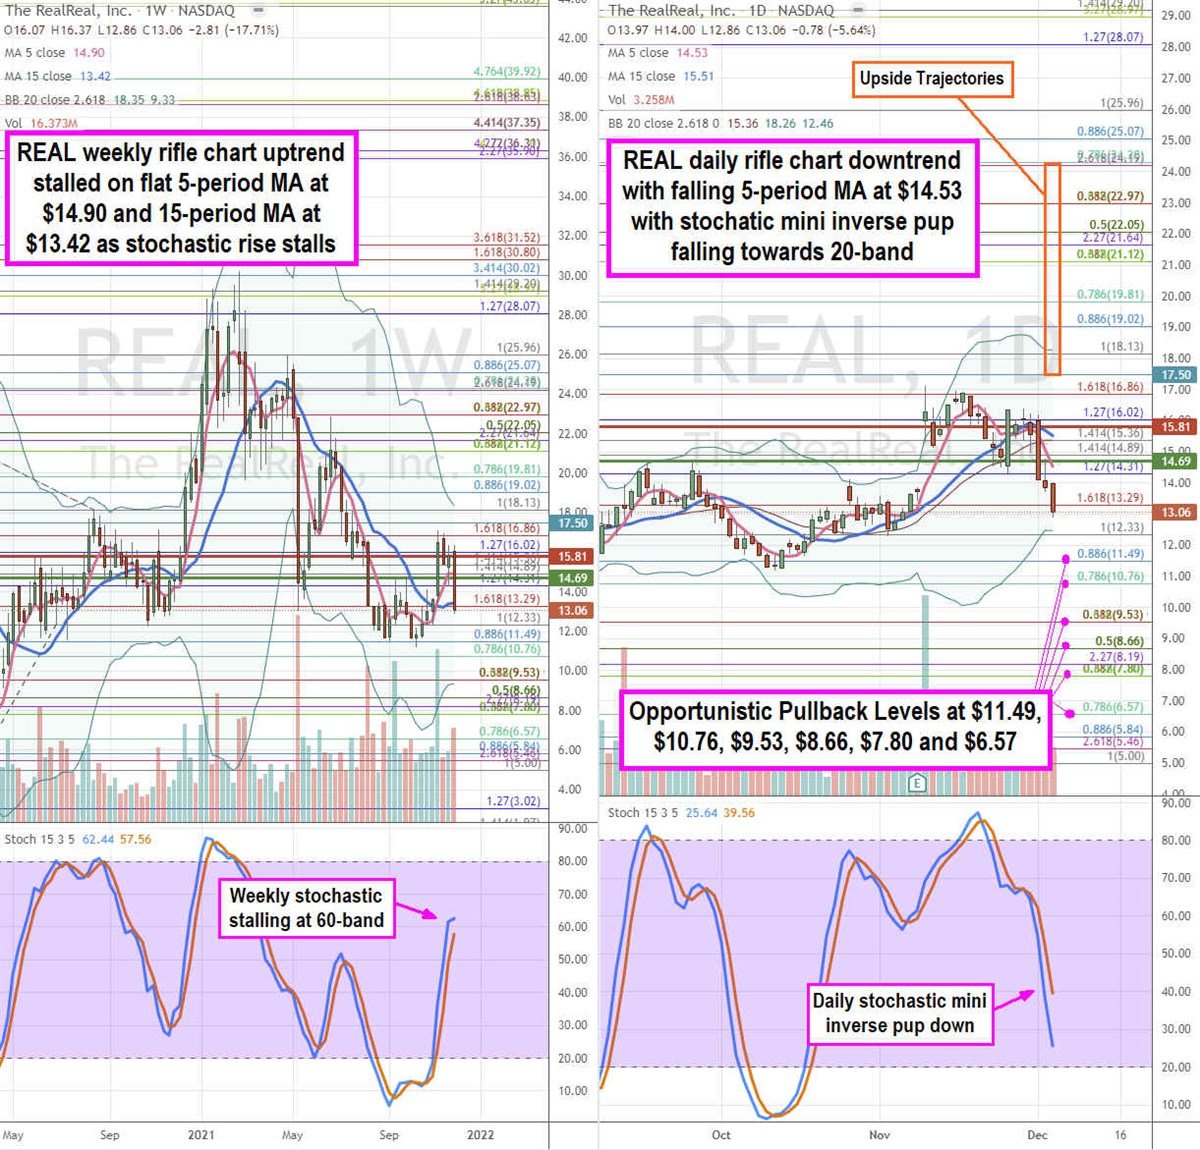 The RealReal weekly and daily charts